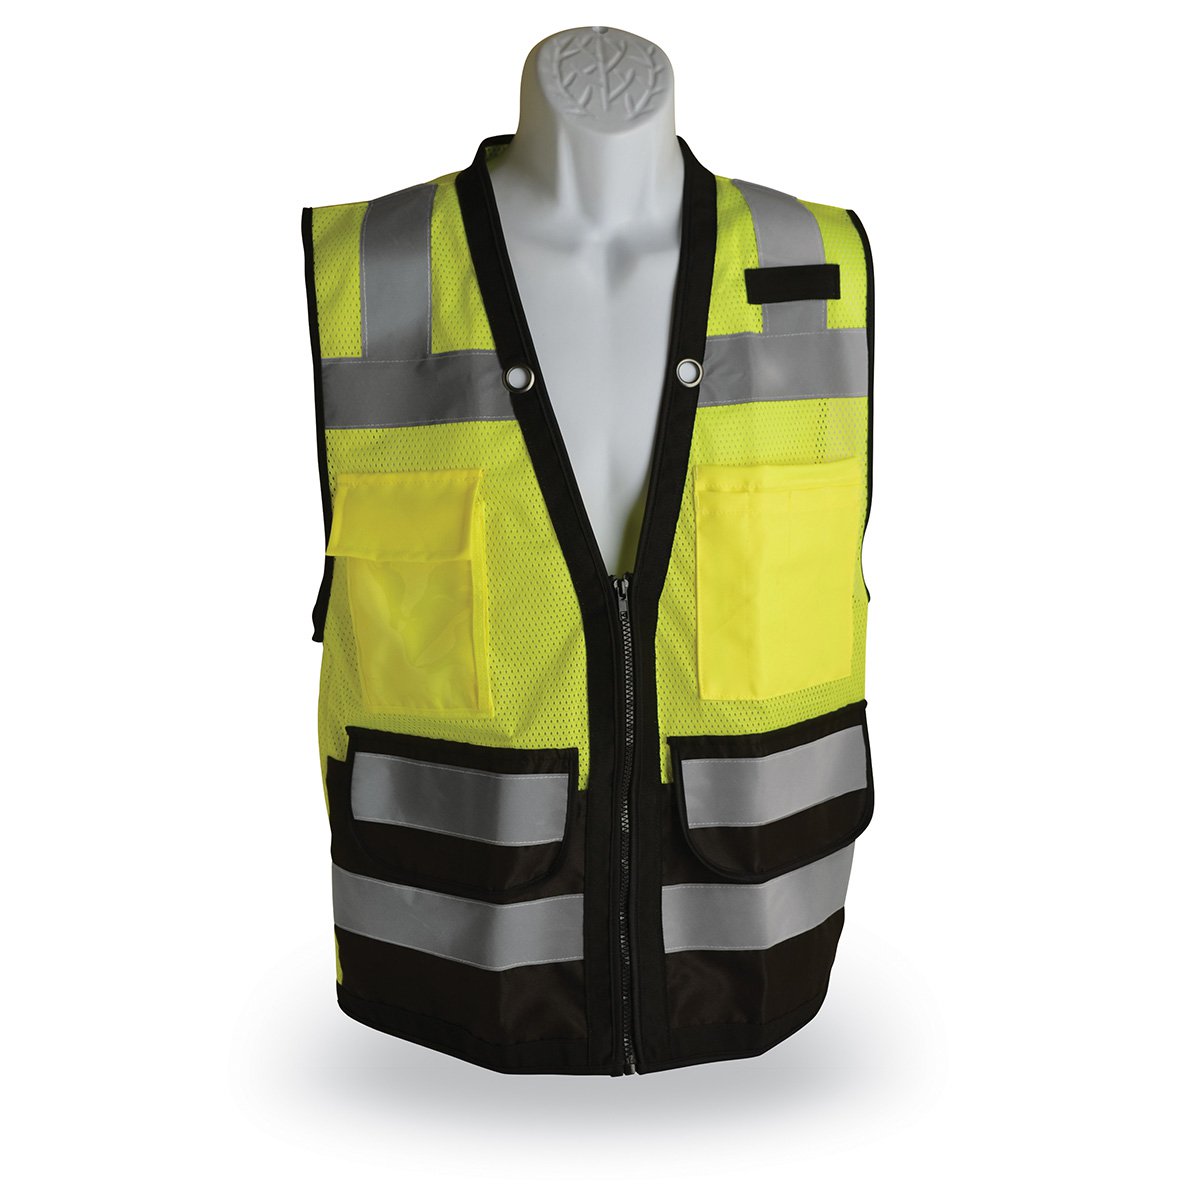 Traffic Vest with 4 Reflective Tape